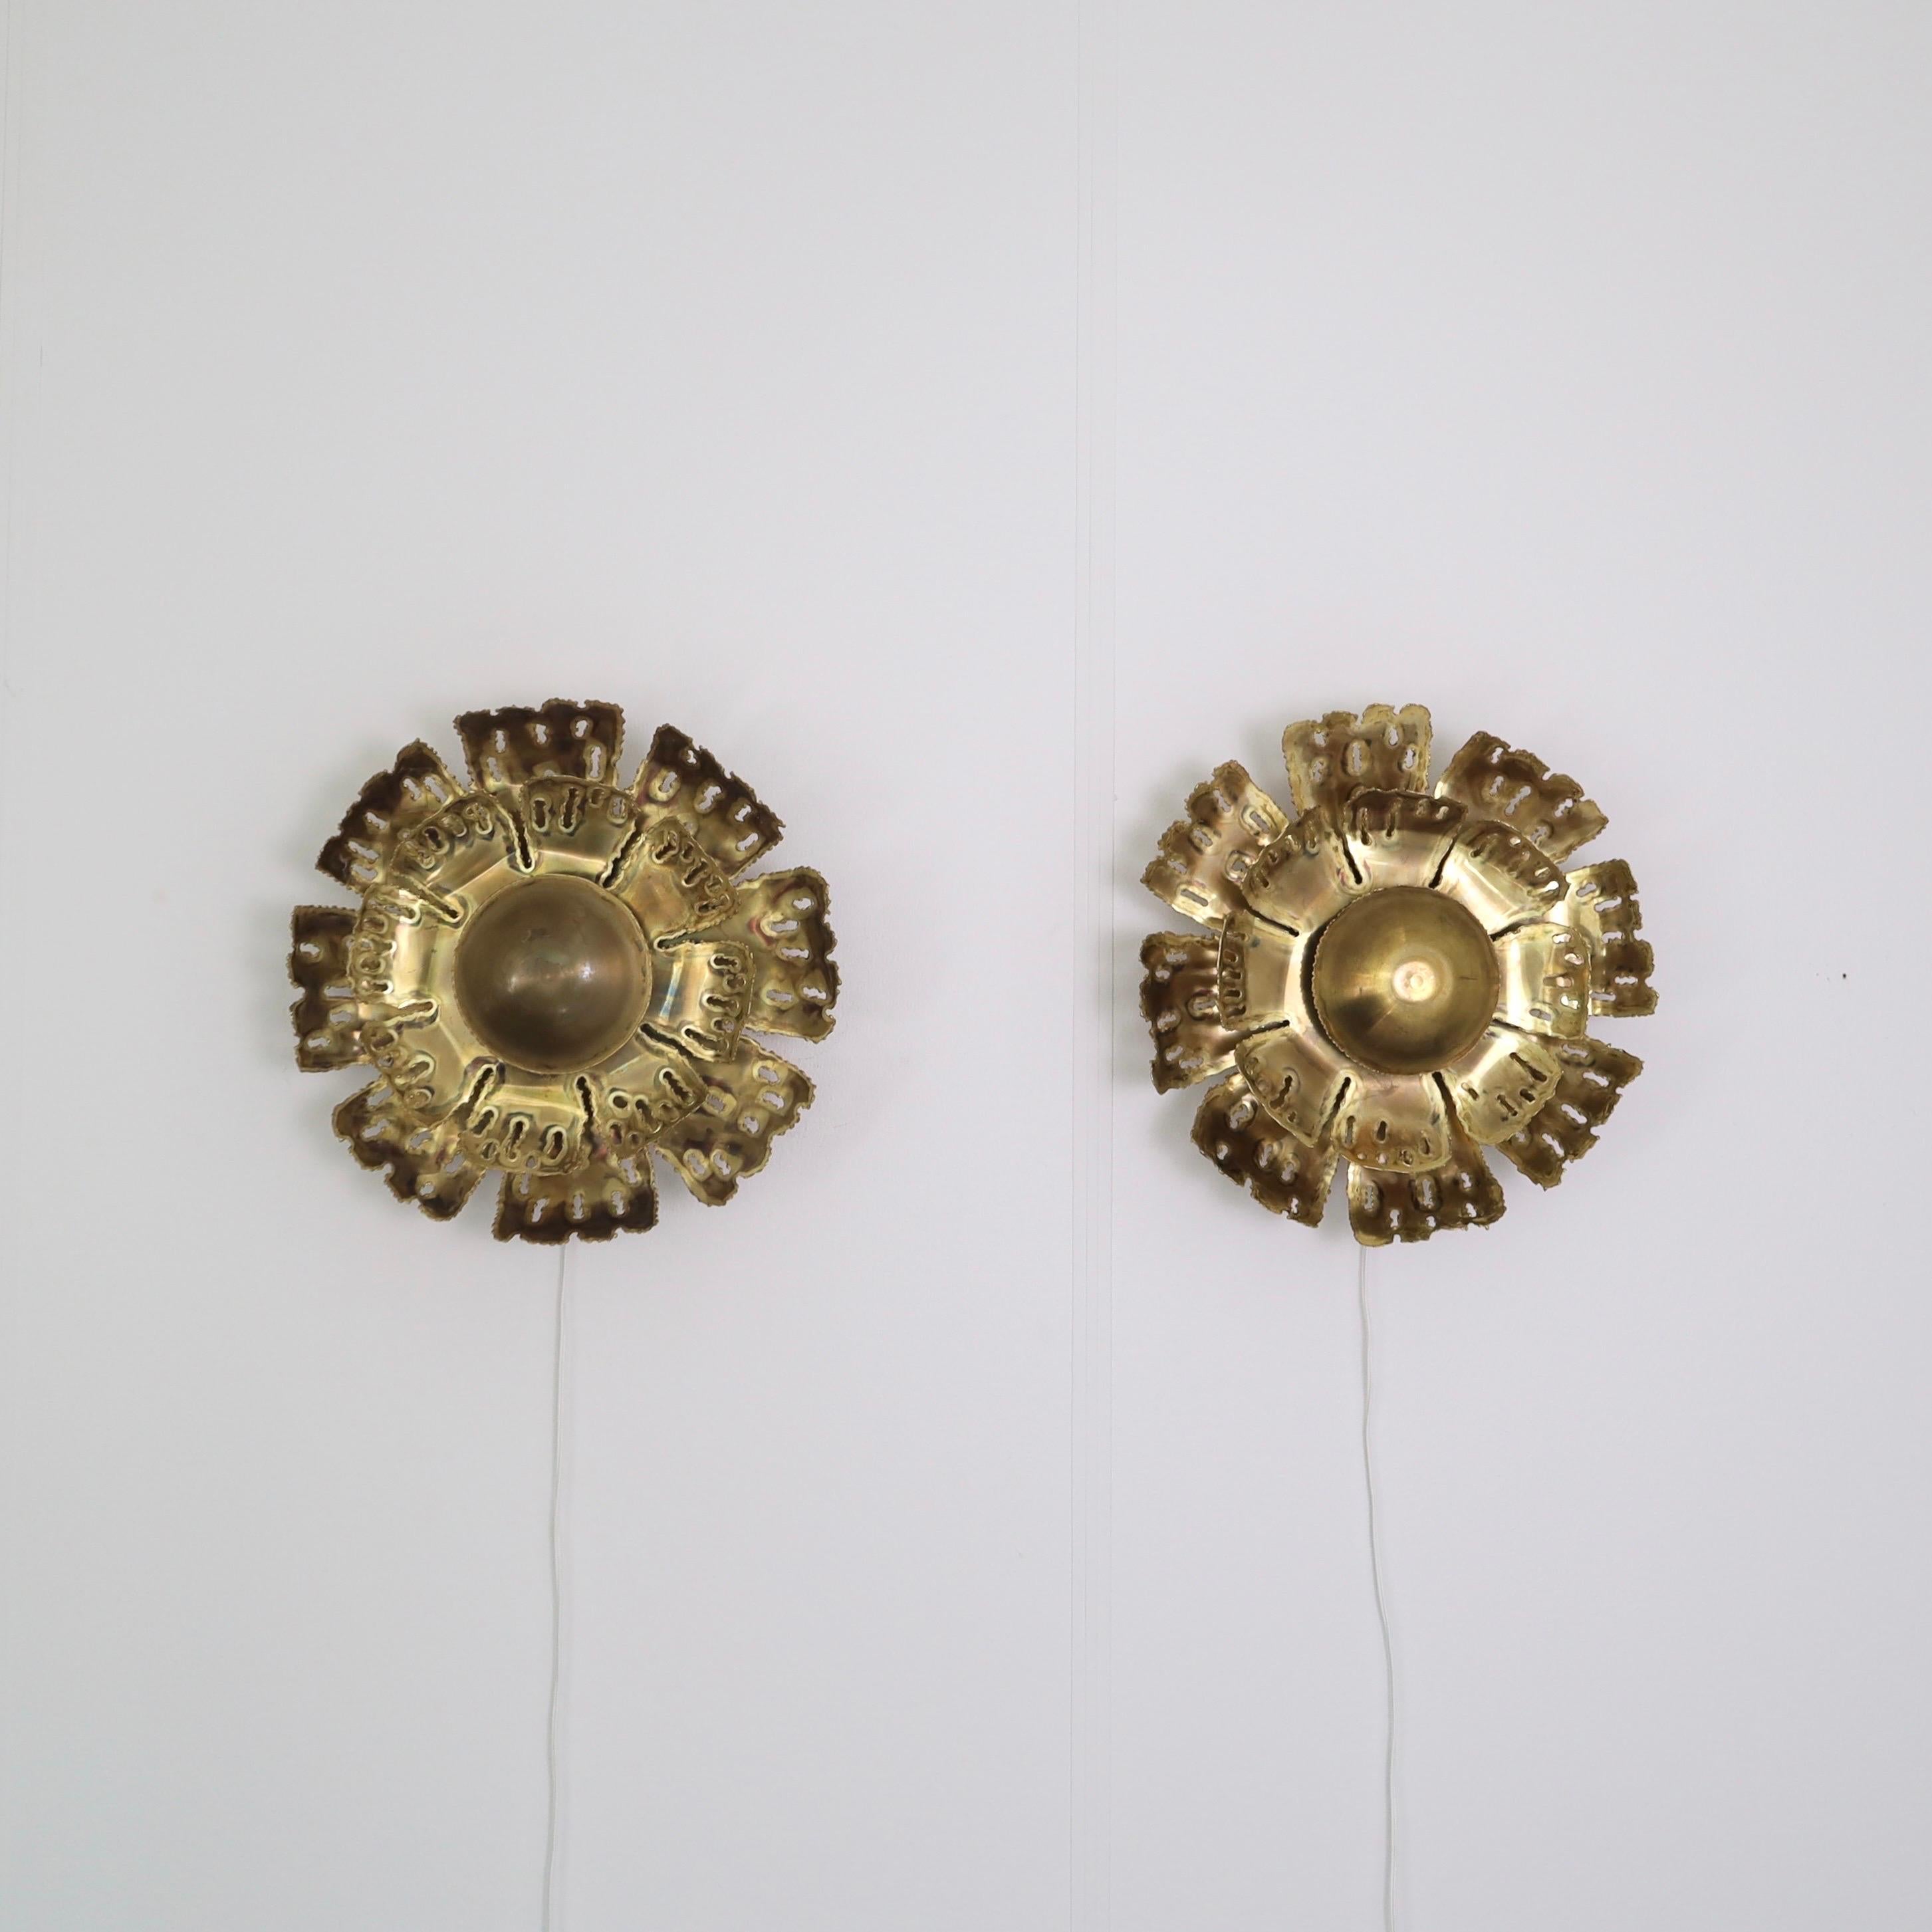 Set of Large Brass Wall Lamps by Svend Aage Holm Sorensen, 1960s, Denmark For Sale 5